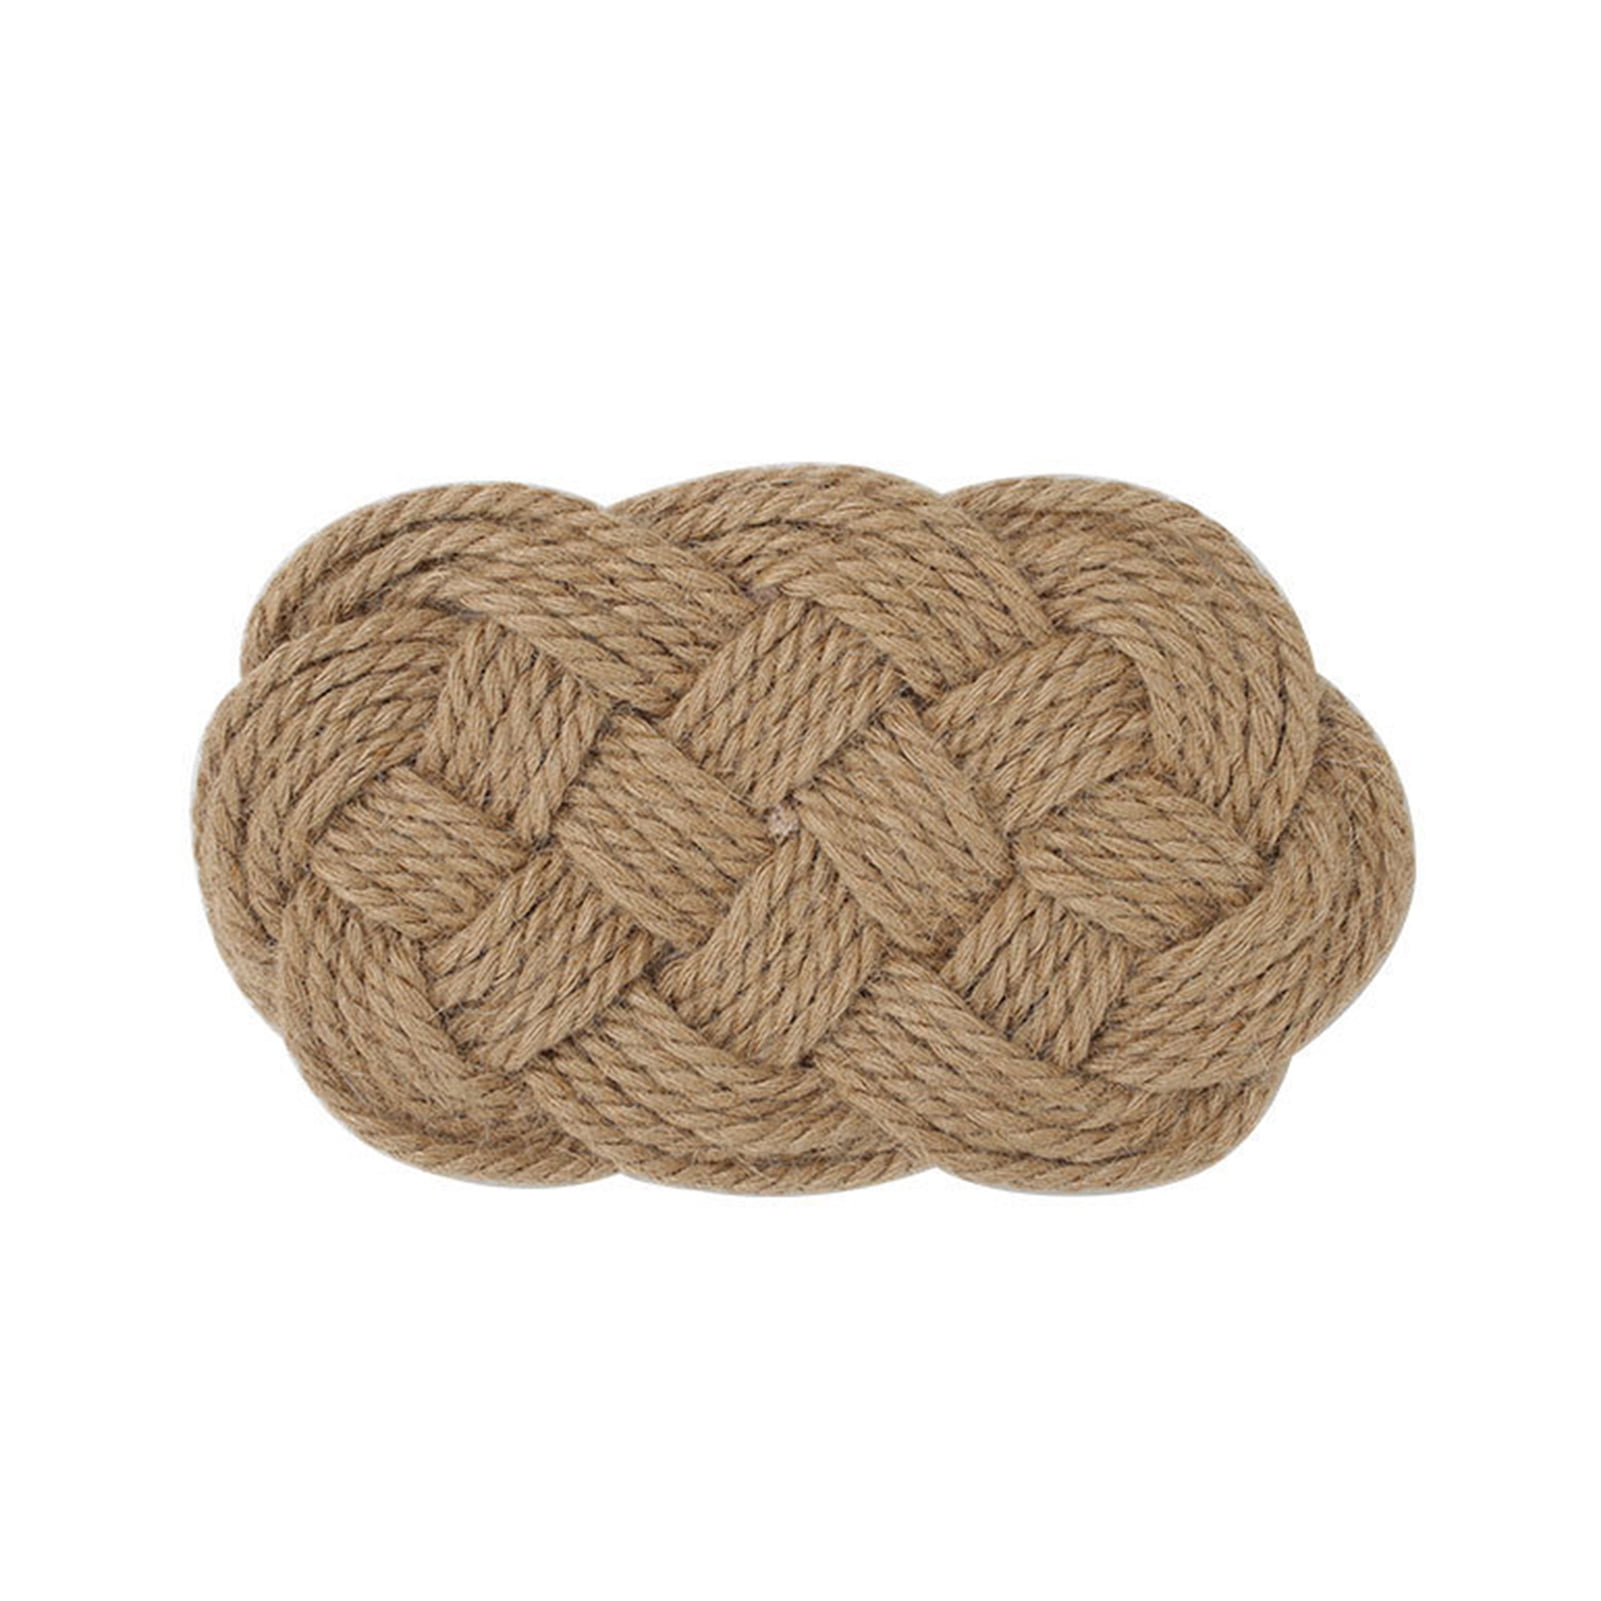 Nordic Jute Natural Hand Woven Cotton Rope Placemat Coaster 